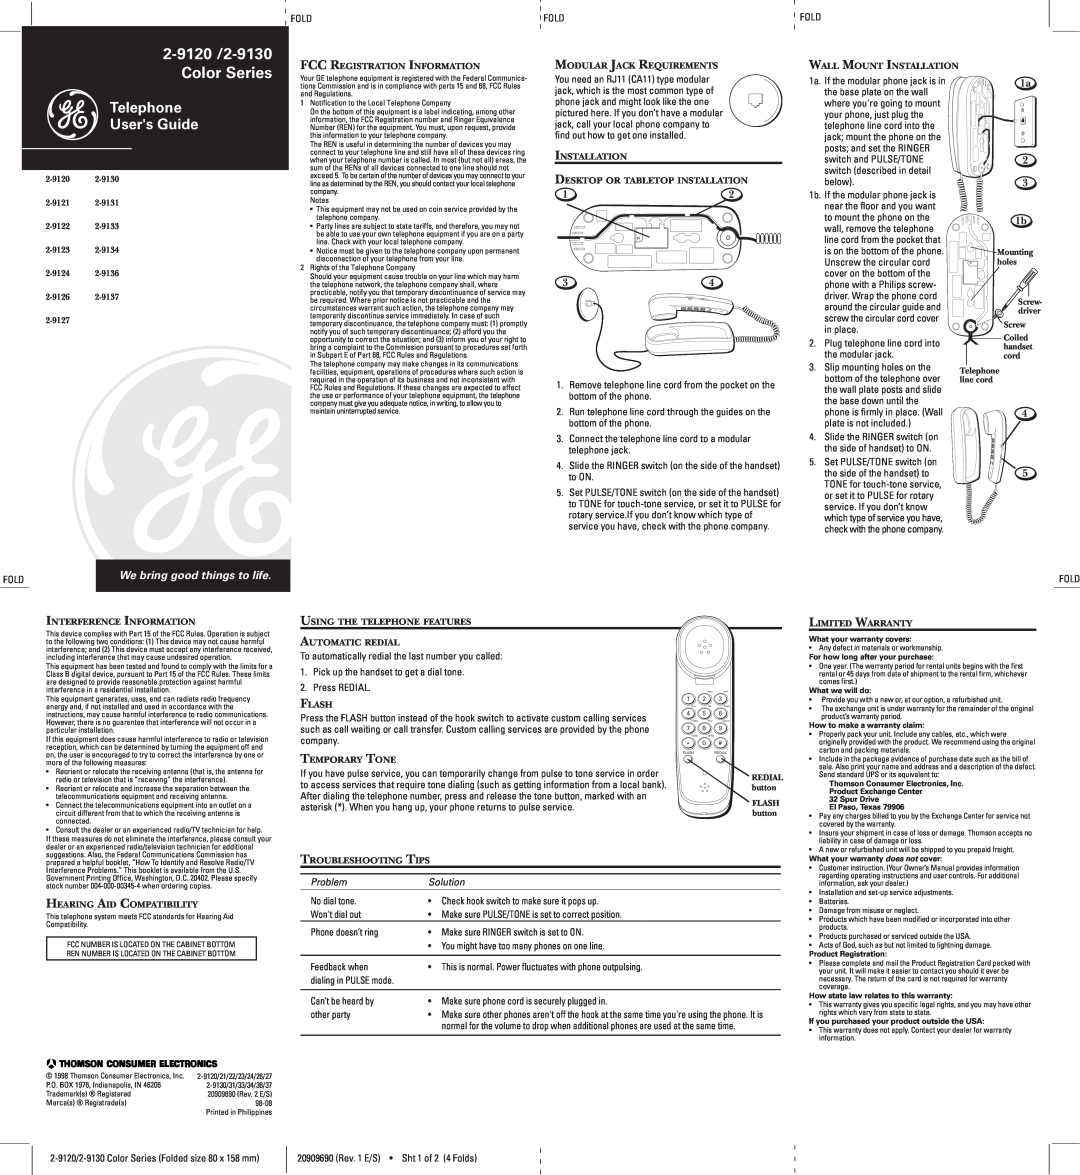 GE 2-9126 warranty 2-9120 /2-9130 Color Series, Telephone Users Guide, We bring good things to life, Problem, Solution 